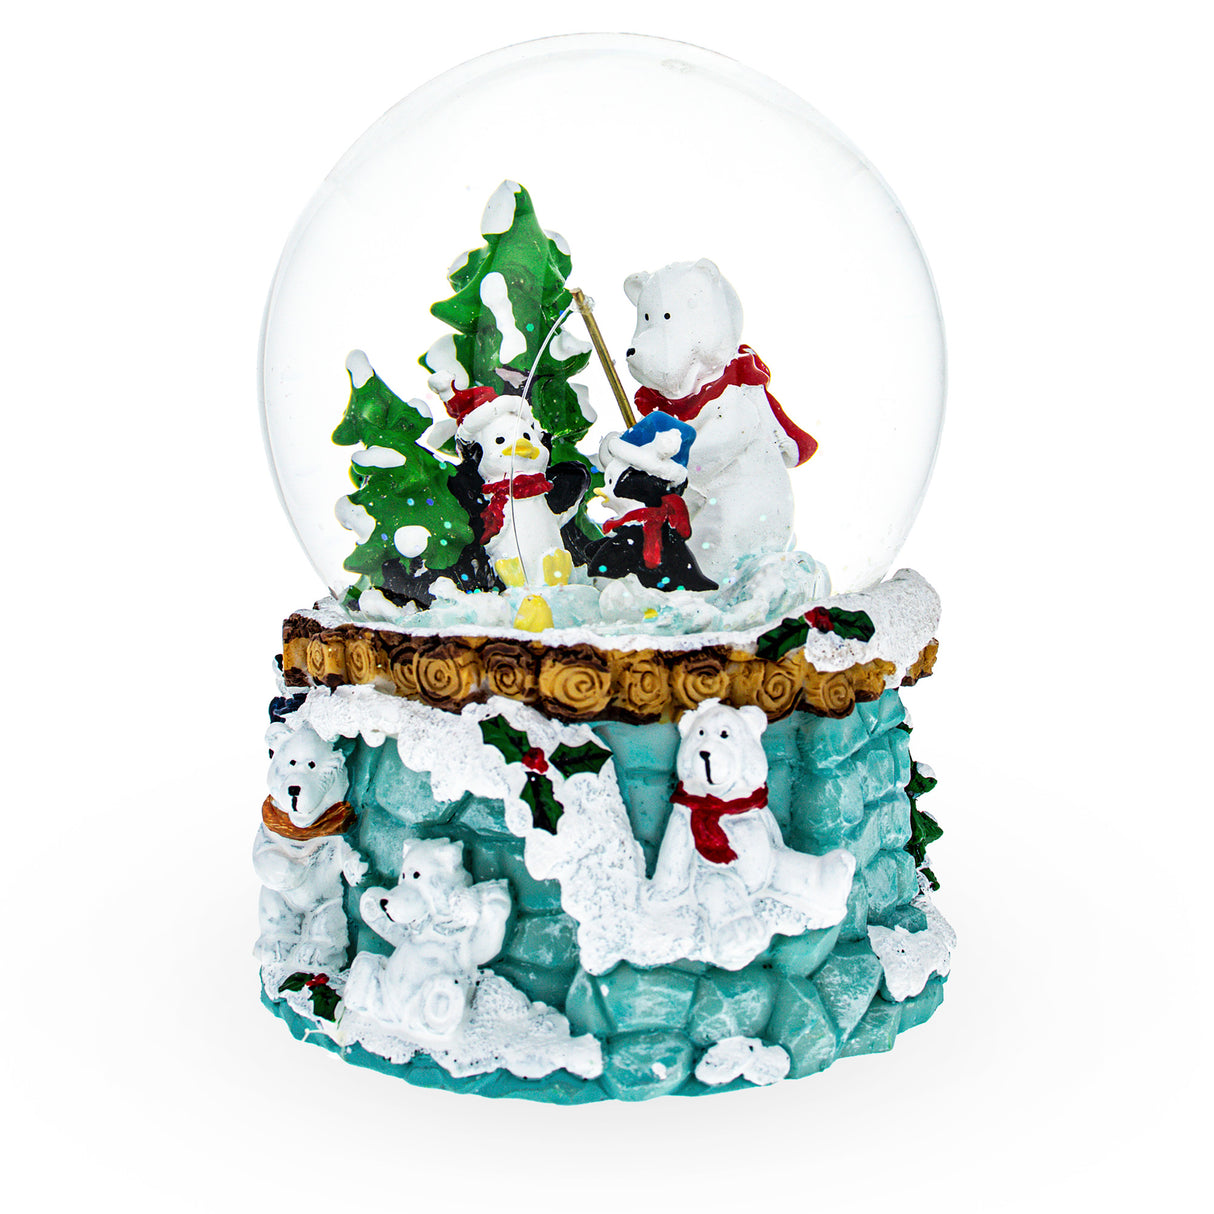 Resin Arctic Fishing Expedition: Musical Christmas Water Snow Globe with Polar Bear and Penguins in Green color